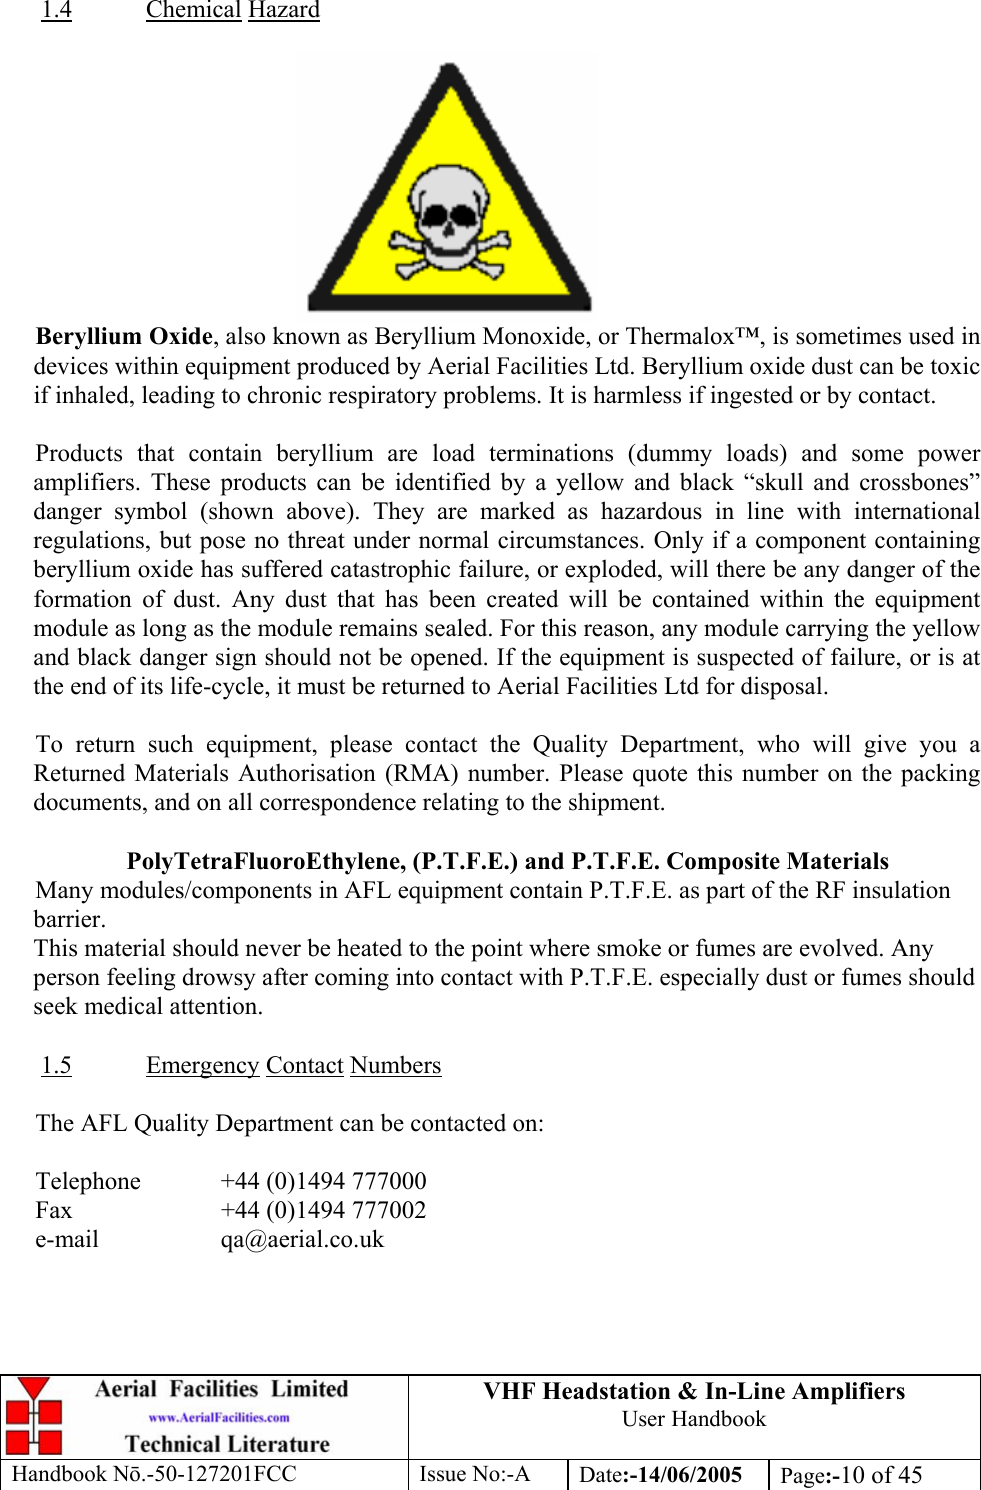 VHF Headstation &amp; In-Line Amplifiers User Handbook Handbook Nō.-50-127201FCC Issue No:-A Date:-14/06/2005  Page:-10 of 45   1.4 Chemical Hazard   Beryllium Oxide, also known as Beryllium Monoxide, or Thermalox™, is sometimes used in devices within equipment produced by Aerial Facilities Ltd. Beryllium oxide dust can be toxic if inhaled, leading to chronic respiratory problems. It is harmless if ingested or by contact.  Products that contain beryllium are load terminations (dummy loads) and some power amplifiers. These products can be identified by a yellow and black “skull and crossbones” danger symbol (shown above). They are marked as hazardous in line with international regulations, but pose no threat under normal circumstances. Only if a component containing beryllium oxide has suffered catastrophic failure, or exploded, will there be any danger of the formation of dust. Any dust that has been created will be contained within the equipment module as long as the module remains sealed. For this reason, any module carrying the yellow and black danger sign should not be opened. If the equipment is suspected of failure, or is at the end of its life-cycle, it must be returned to Aerial Facilities Ltd for disposal.  To return such equipment, please contact the Quality Department, who will give you a Returned Materials Authorisation (RMA) number. Please quote this number on the packing documents, and on all correspondence relating to the shipment.  PolyTetraFluoroEthylene, (P.T.F.E.) and P.T.F.E. Composite Materials Many modules/components in AFL equipment contain P.T.F.E. as part of the RF insulation barrier. This material should never be heated to the point where smoke or fumes are evolved. Any person feeling drowsy after coming into contact with P.T.F.E. especially dust or fumes should seek medical attention.  1.5 Emergency Contact Numbers  The AFL Quality Department can be contacted on:  Telephone   +44 (0)1494 777000 Fax    +44 (0)1494 777002 e-mail   qa@aerial.co.uk  